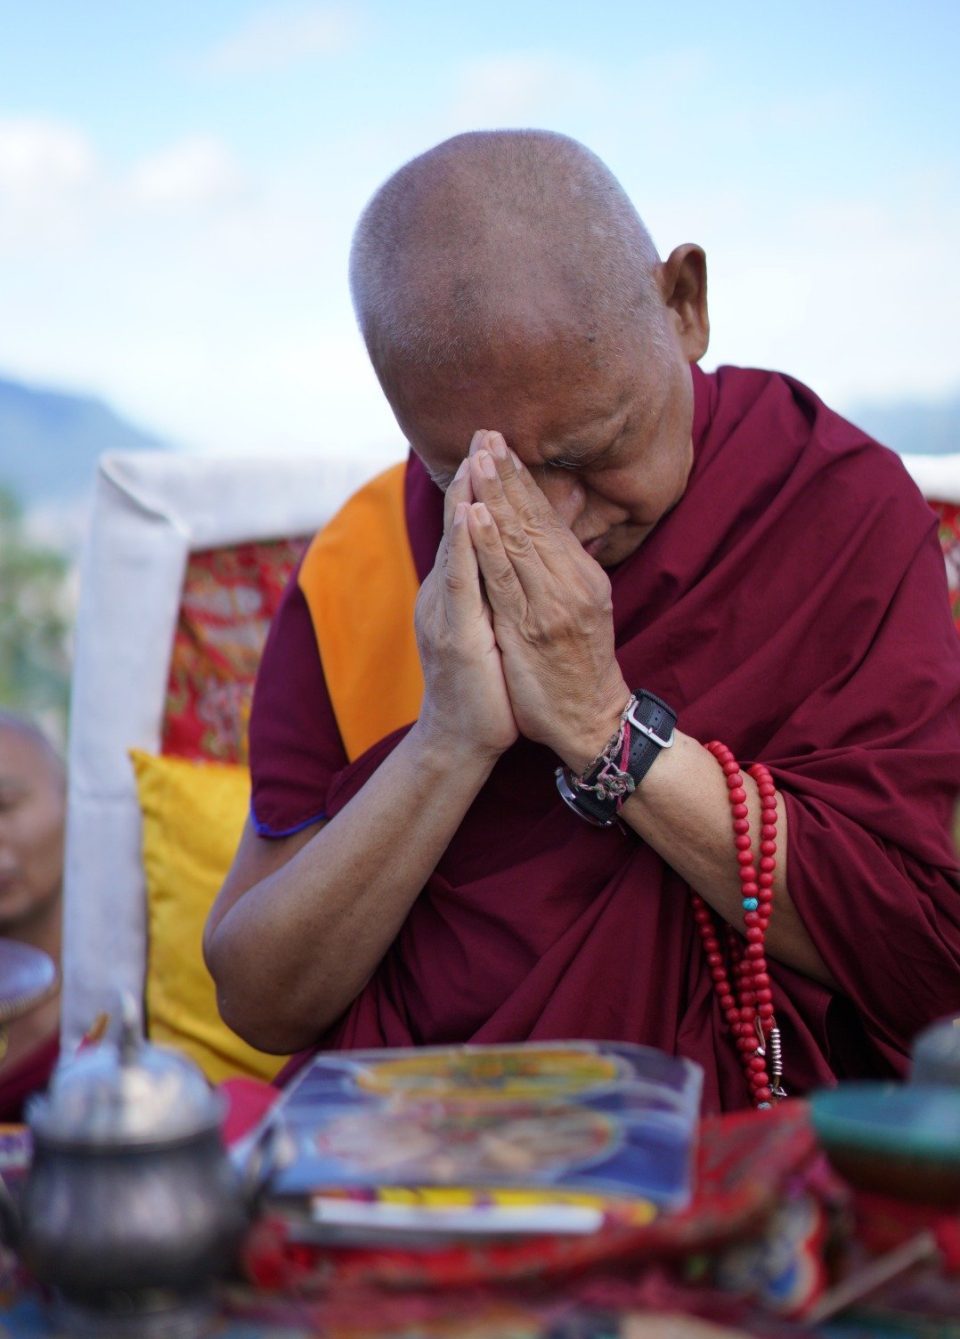 Advice from Lama Zopa Rinpoche: Why the Guru Shows the Aspect of Making Mistakes